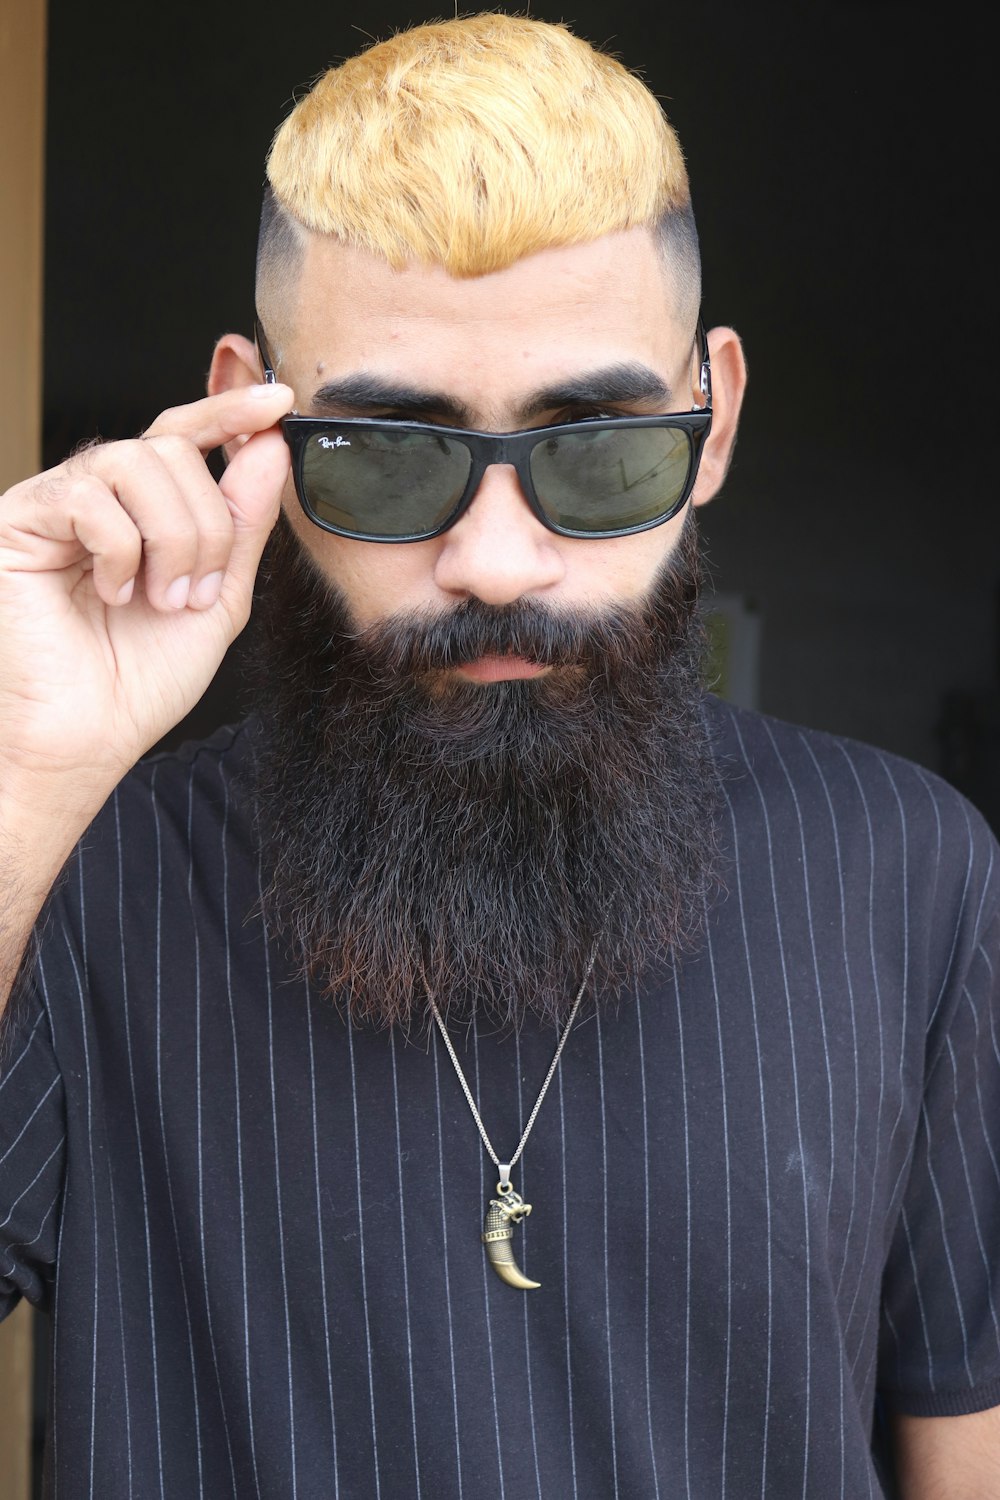 a man with a yellow hair and beard wearing sunglasses